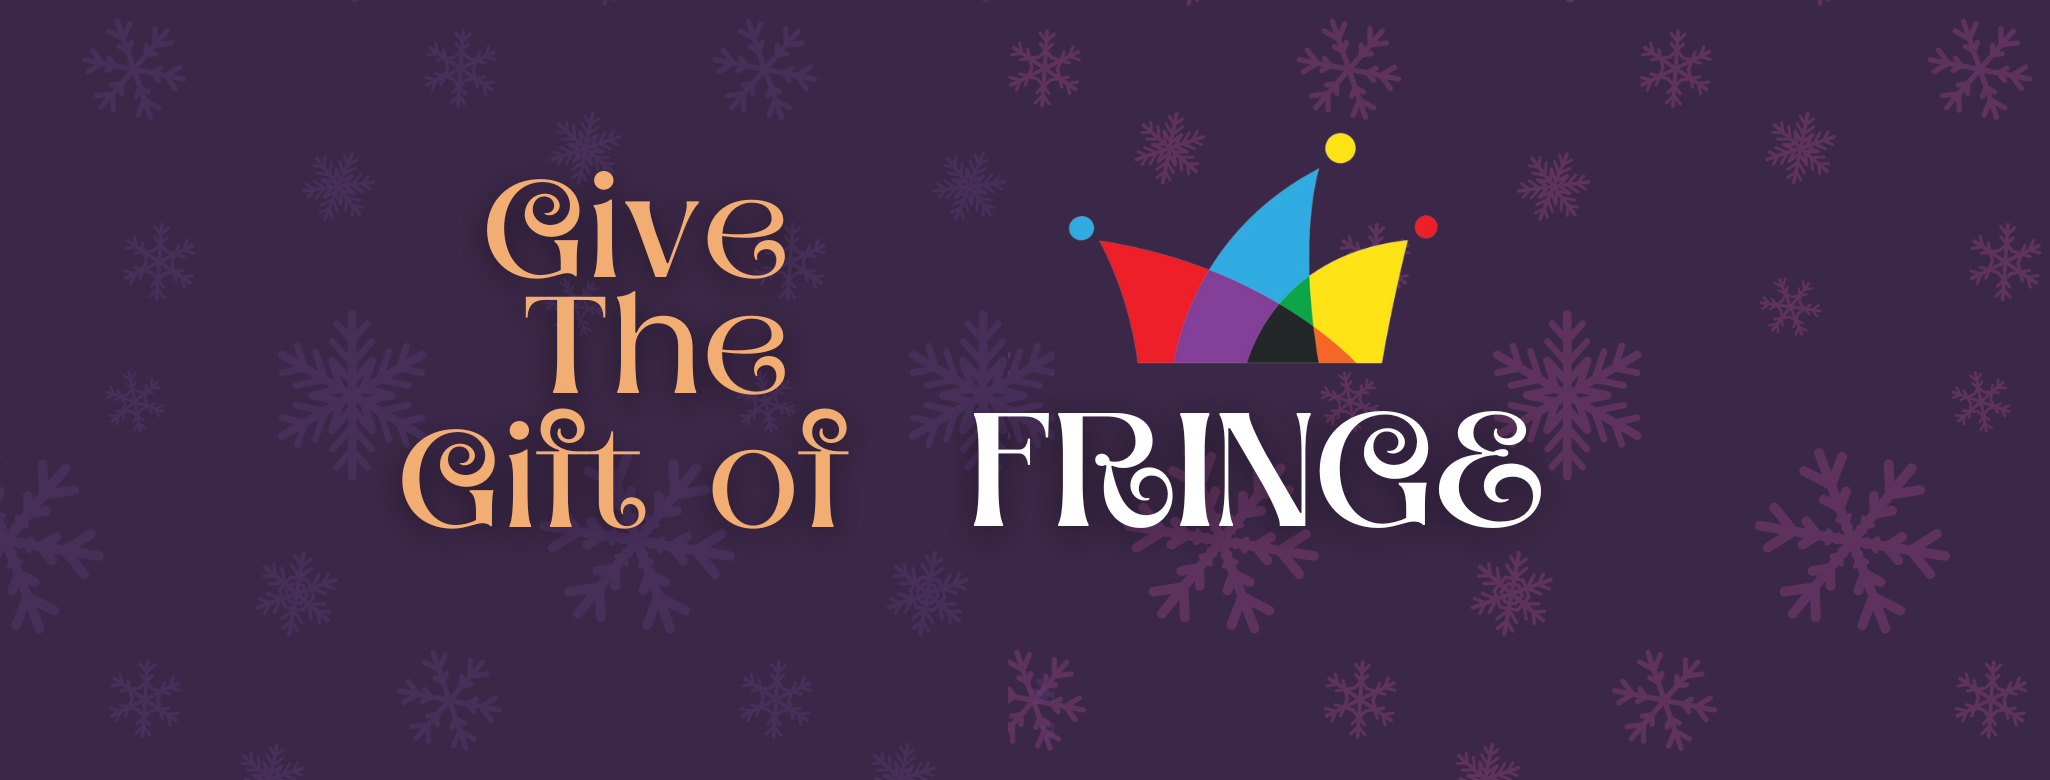 Give the gift of Fringe.